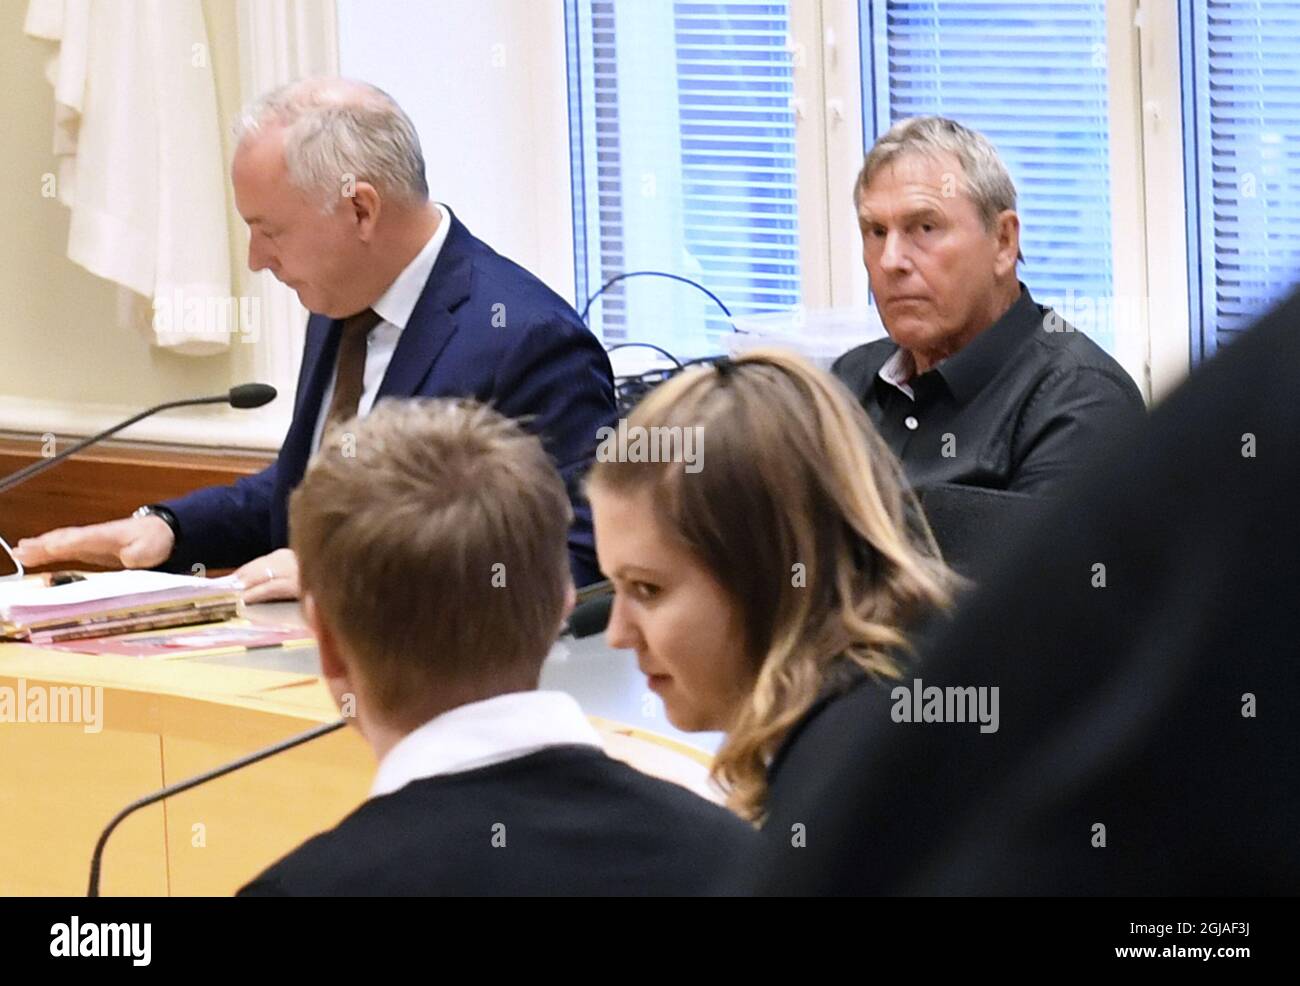 KARLSTAD 2016-12-19 File Ulf Karlsson (r), former head Coach of Sweden`s Track and Field team, is seen with his lawyer Johan Eriksson in the court in Karlstad, Sweden, December 19, 2019. Ulf Karlsson was Monday, January 9, sentenced for slander after accusing SwedenÂ’s top footballer Zlatan Ibrahimovic for doping. Foto: Fredrik Sandberg / TT / Kod 10080  Stock Photo